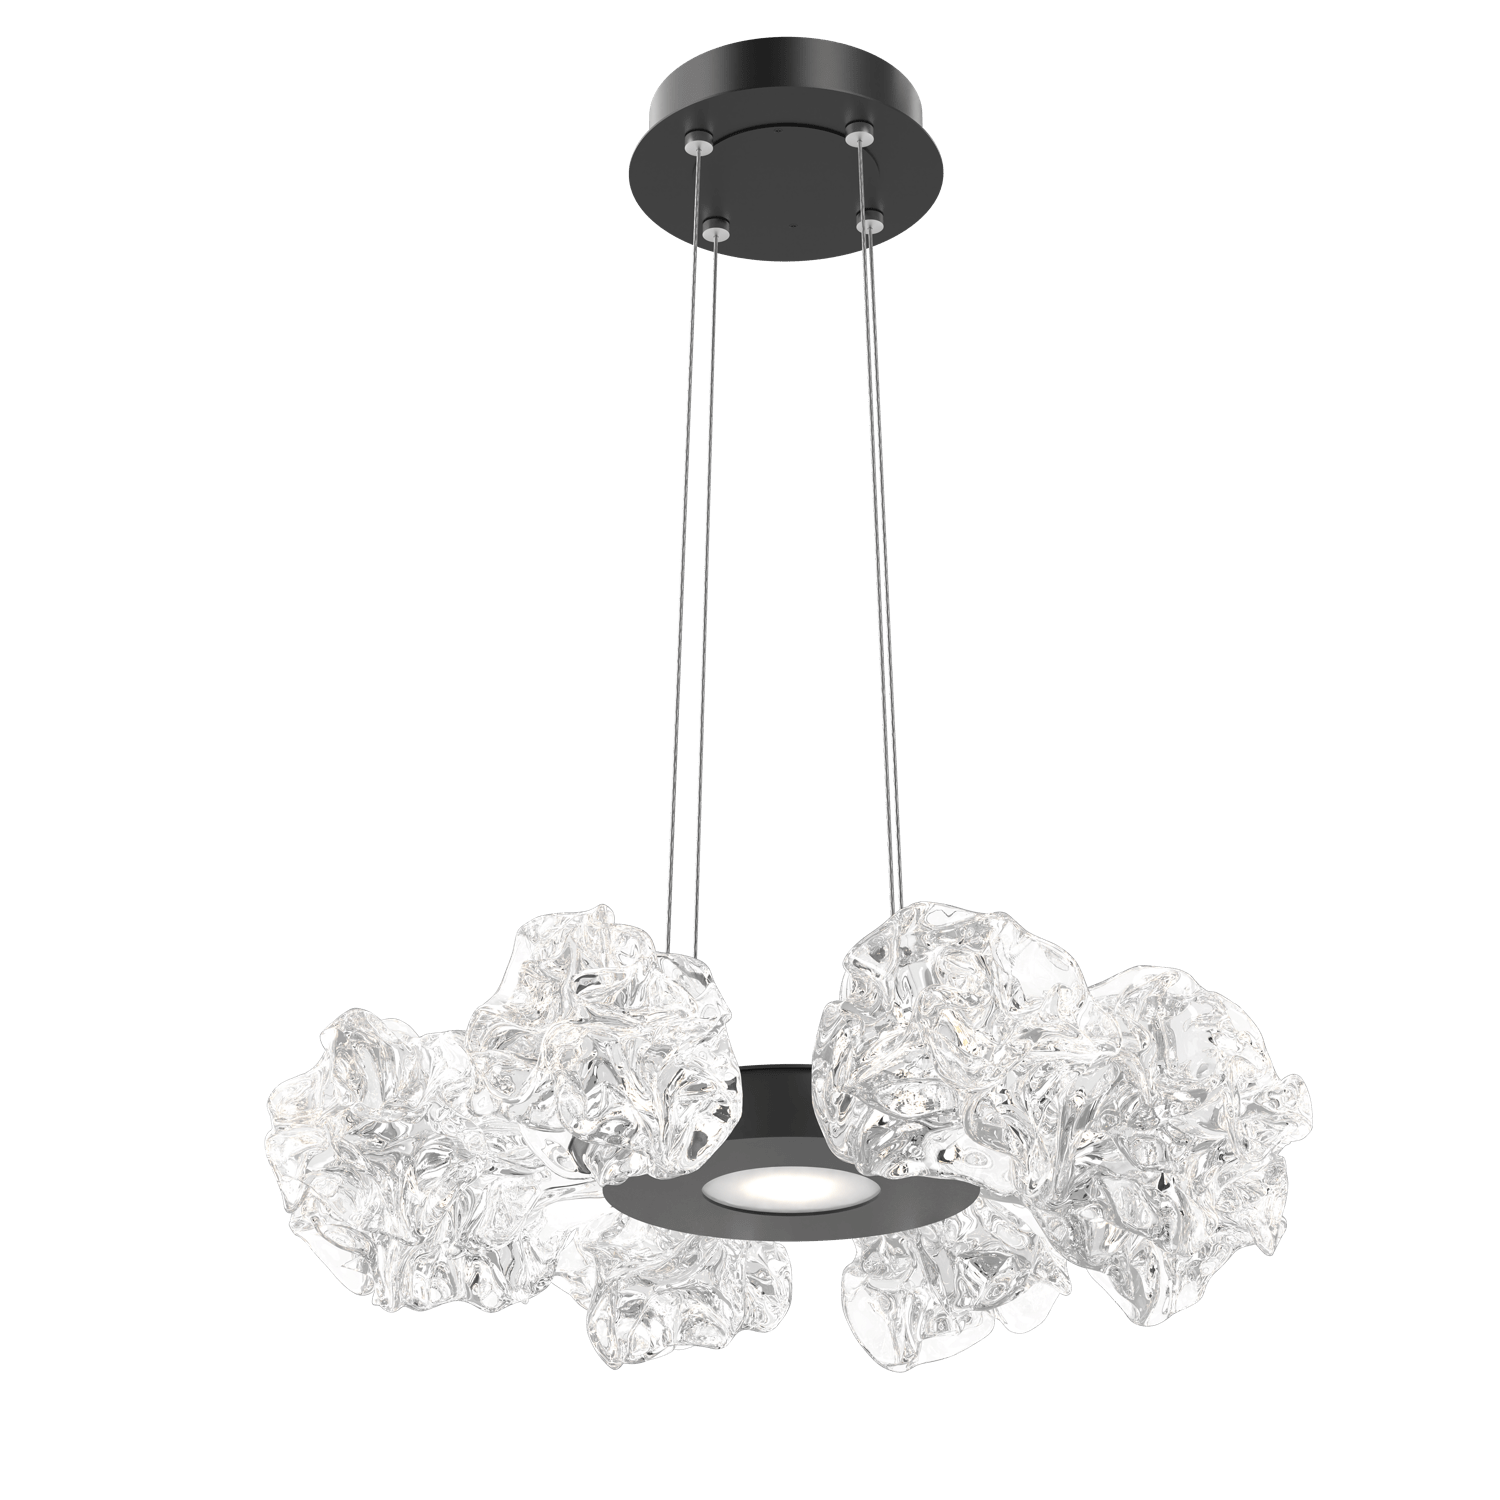 CHB0059-24-MB-Hammerton-Studio-Blossom-24-inch-radial-ring-chandelier-with-matte-black-finish-and-clear-handblown-crystal-glass-shades-and-LED-lamping